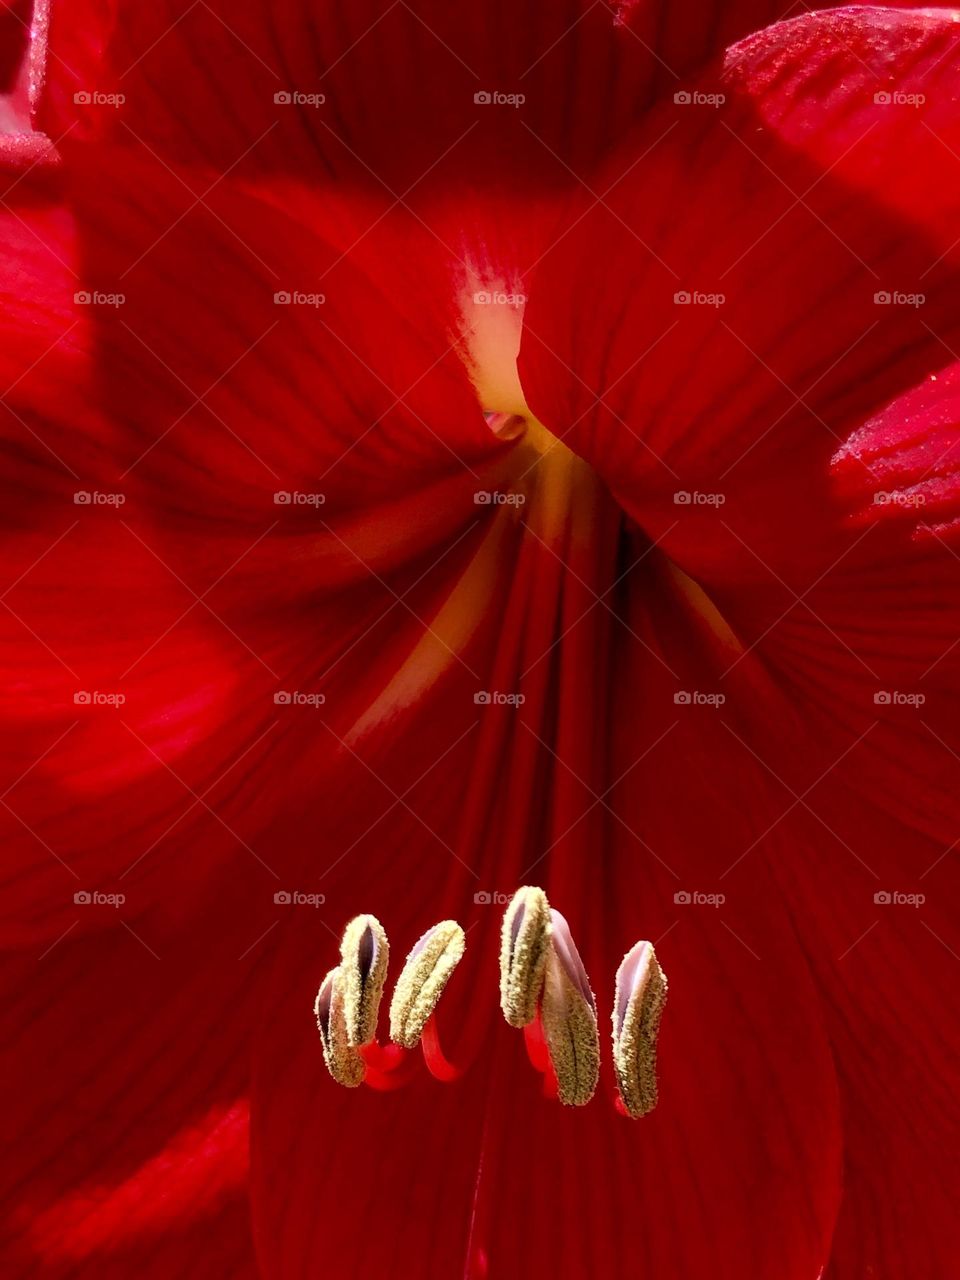 Closeup of pollen inside a blooming amaryllis. The vibrant red reveals structure of the flower.